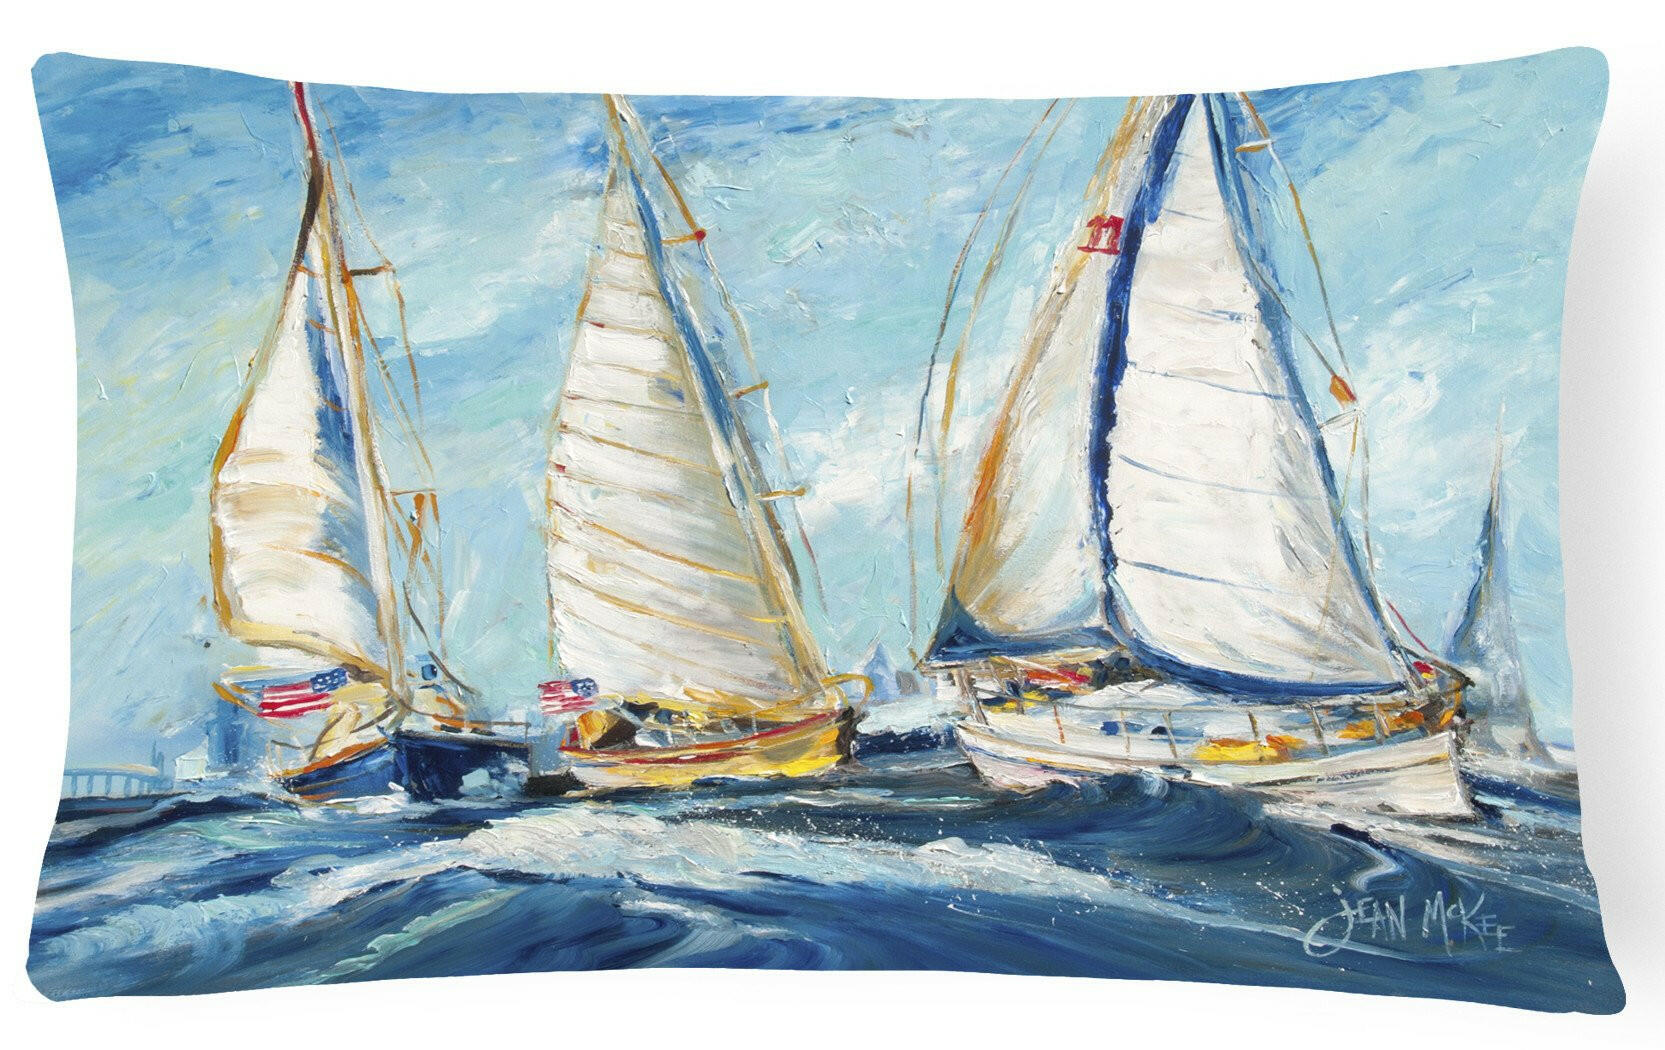 Roll me over Sailboats Canvas Fabric Decorative Pillow JMK1027PW1216 by Caroline's Treasures